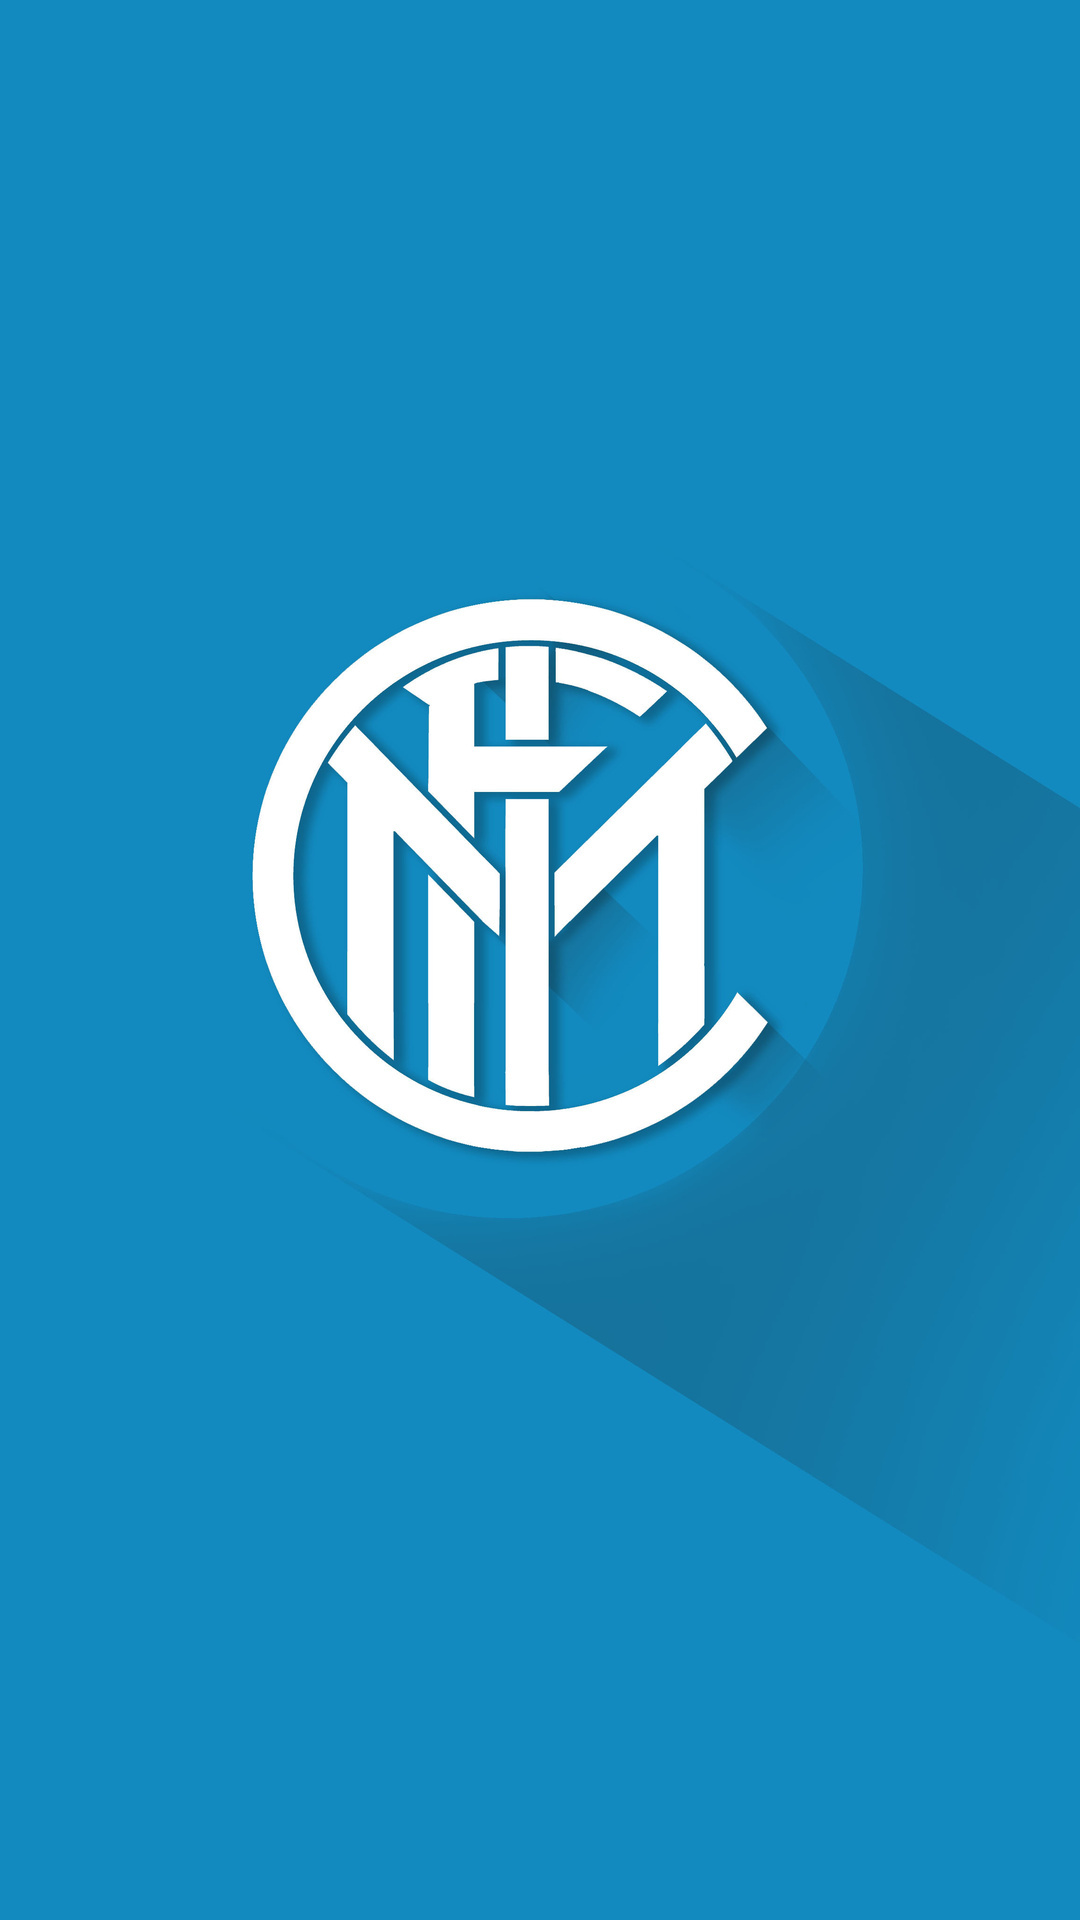 Inter: The joint-second most successful club in Italy. 1080x1920 Full HD Wallpaper.